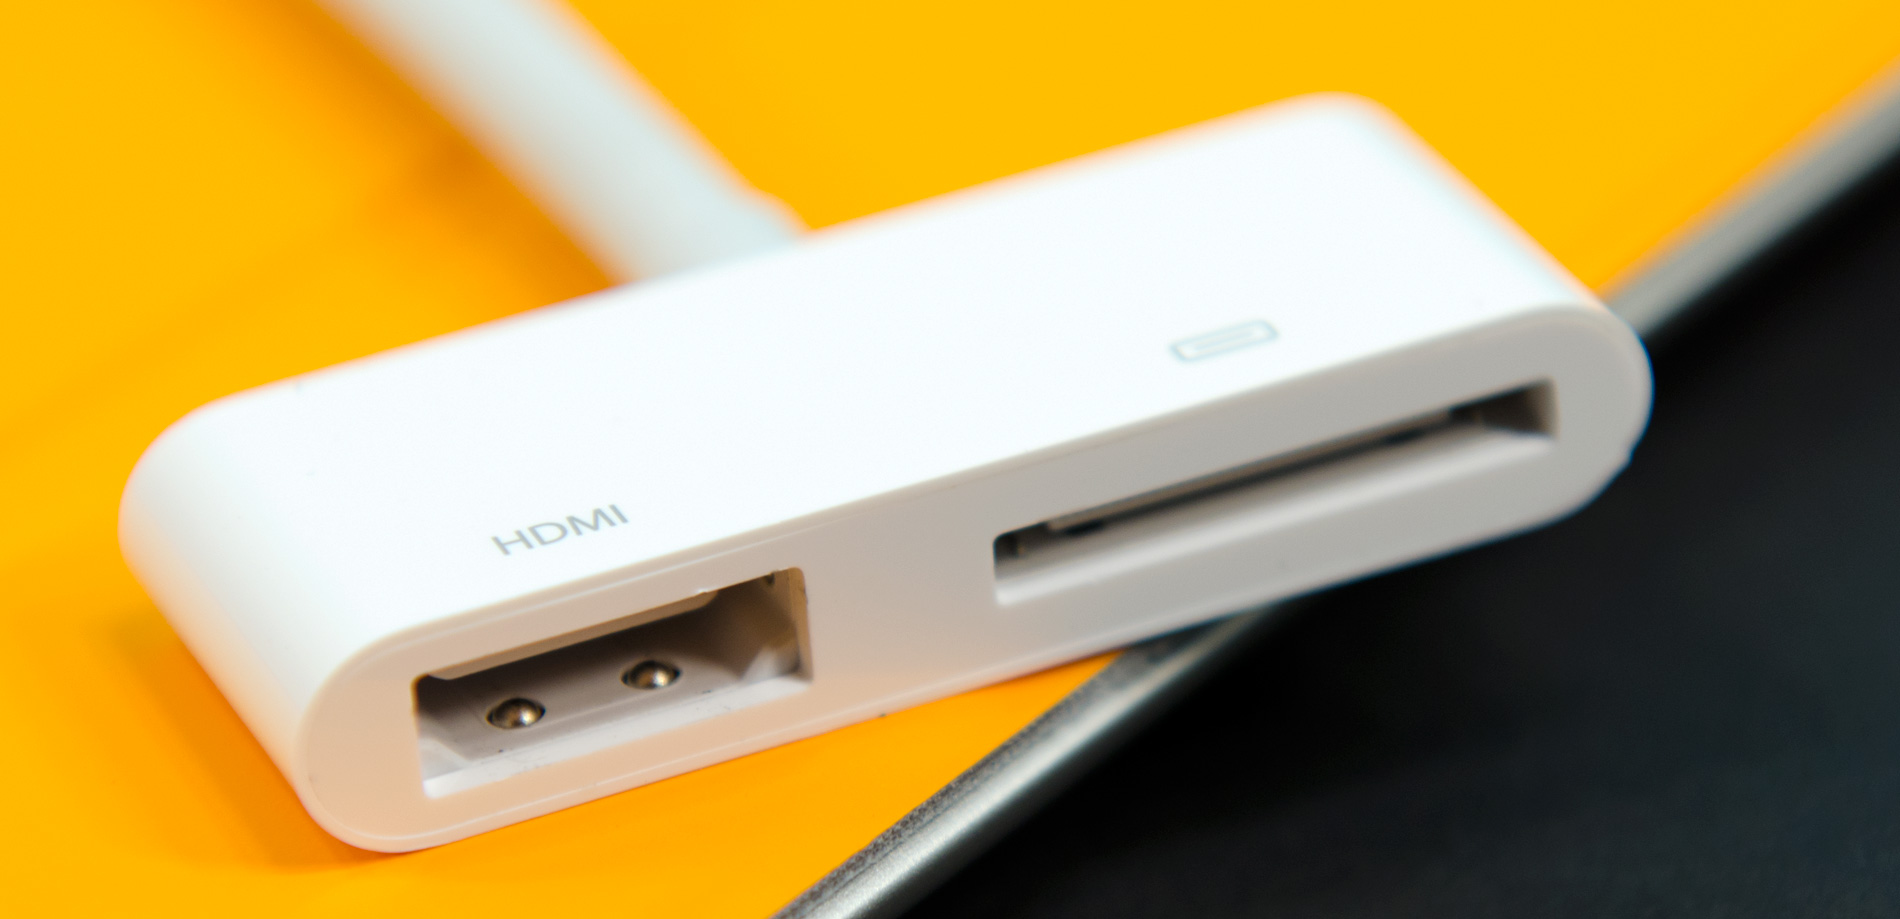 HDMI Mirroring & Charging - The Apple iPad Review